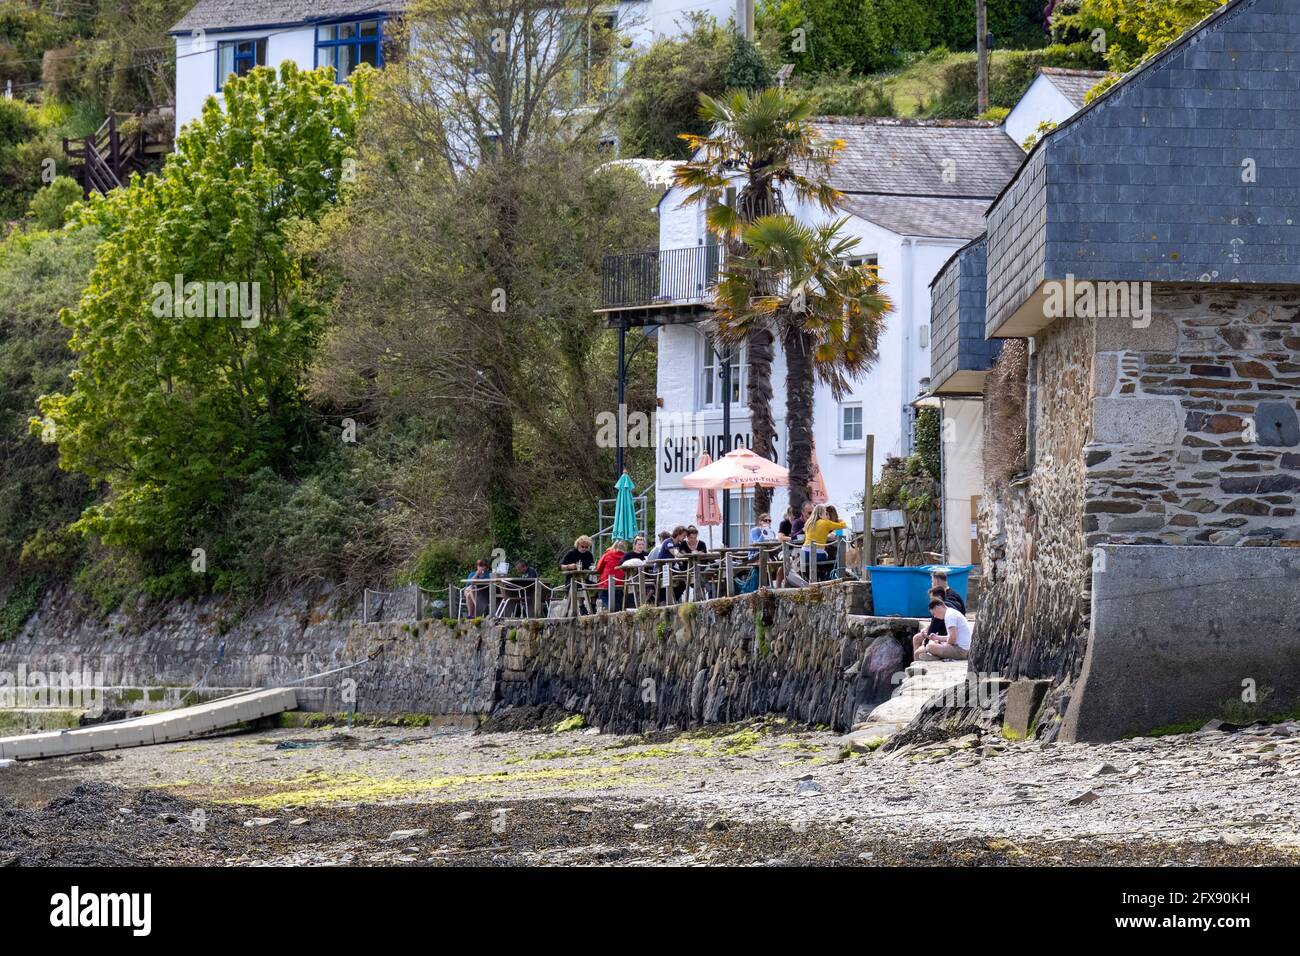 HELSTON, CORNWALL, UK - MAY 14 : People enjoying dining out at the Shipwright Arms in Helston, Cornwall on May 14, 2021. Unidentified people Stock Photo